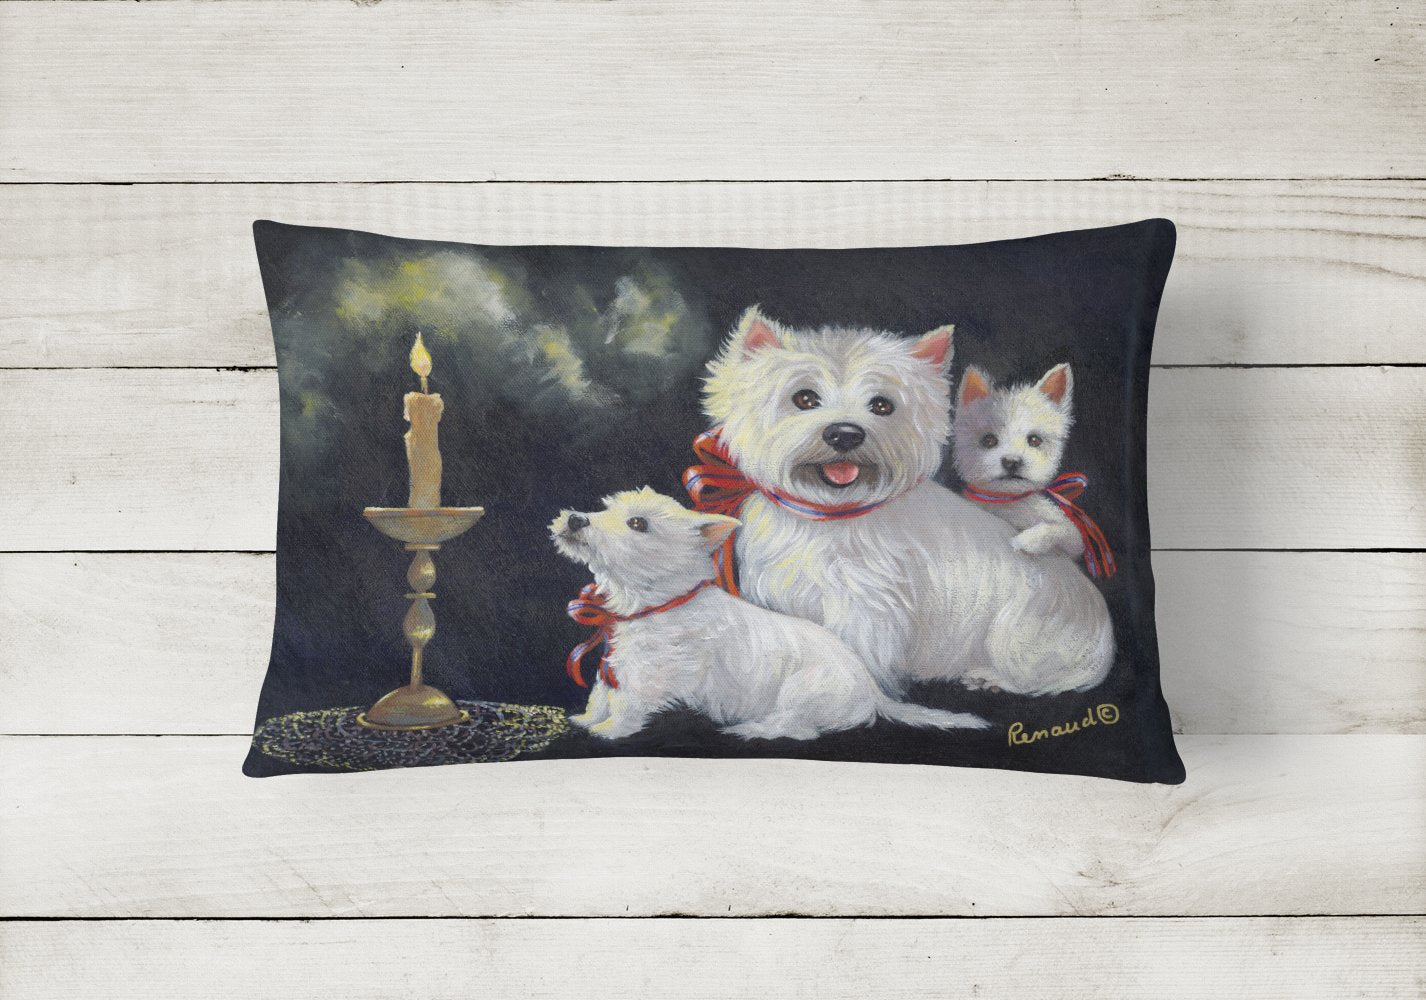 Buy this Westie Westie's Aglow Canvas Fabric Decorative Pillow PPP3288PW1216